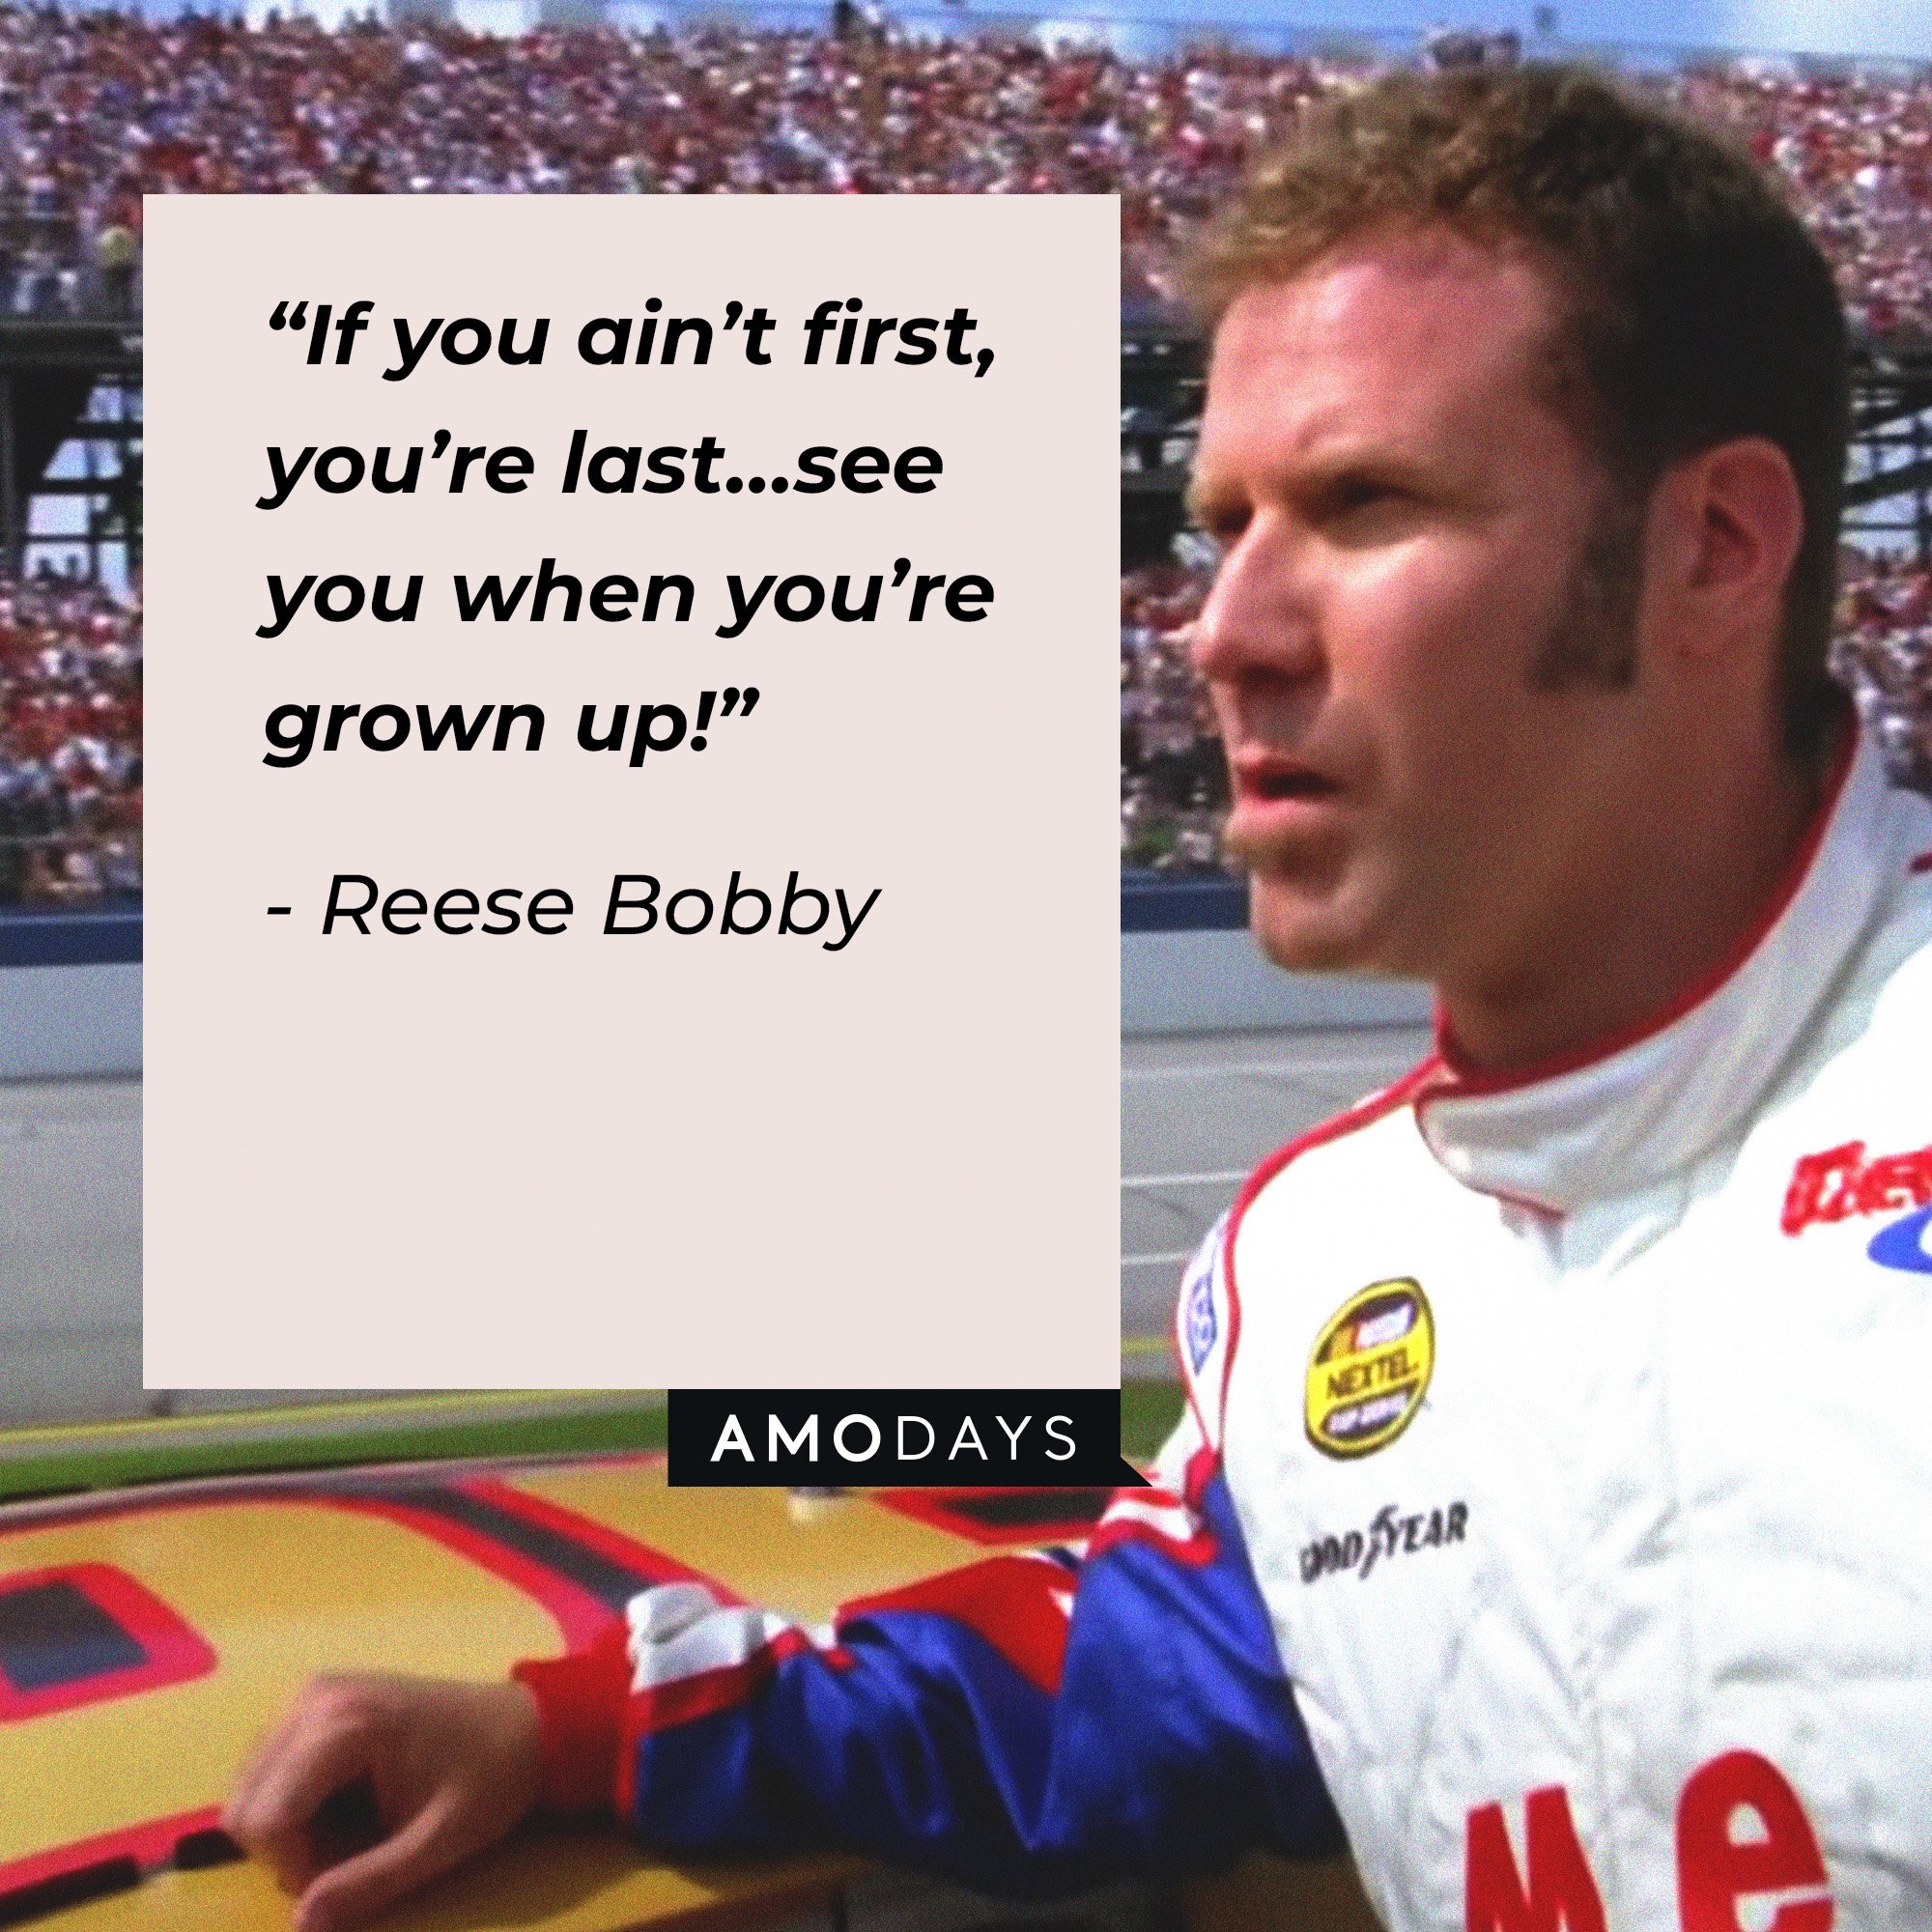 Reese Bobby’s quote: “If you ain't first, you're last…See you when you're grown up.”  | Image: AmoDays